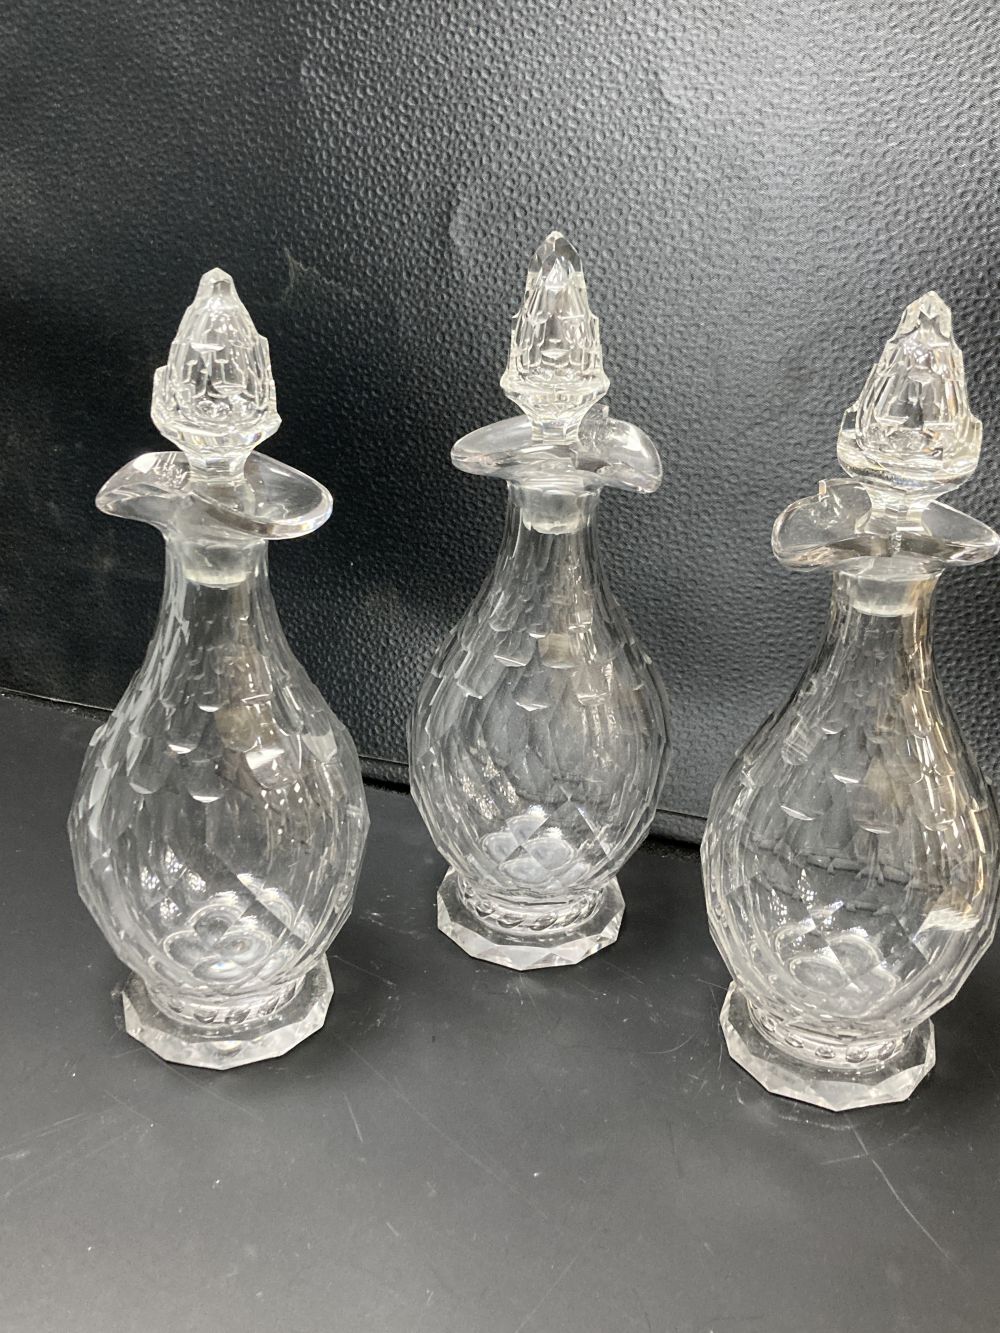 A set of three facet cut glass decanters and stoppers, early 19th century, 27.5cm